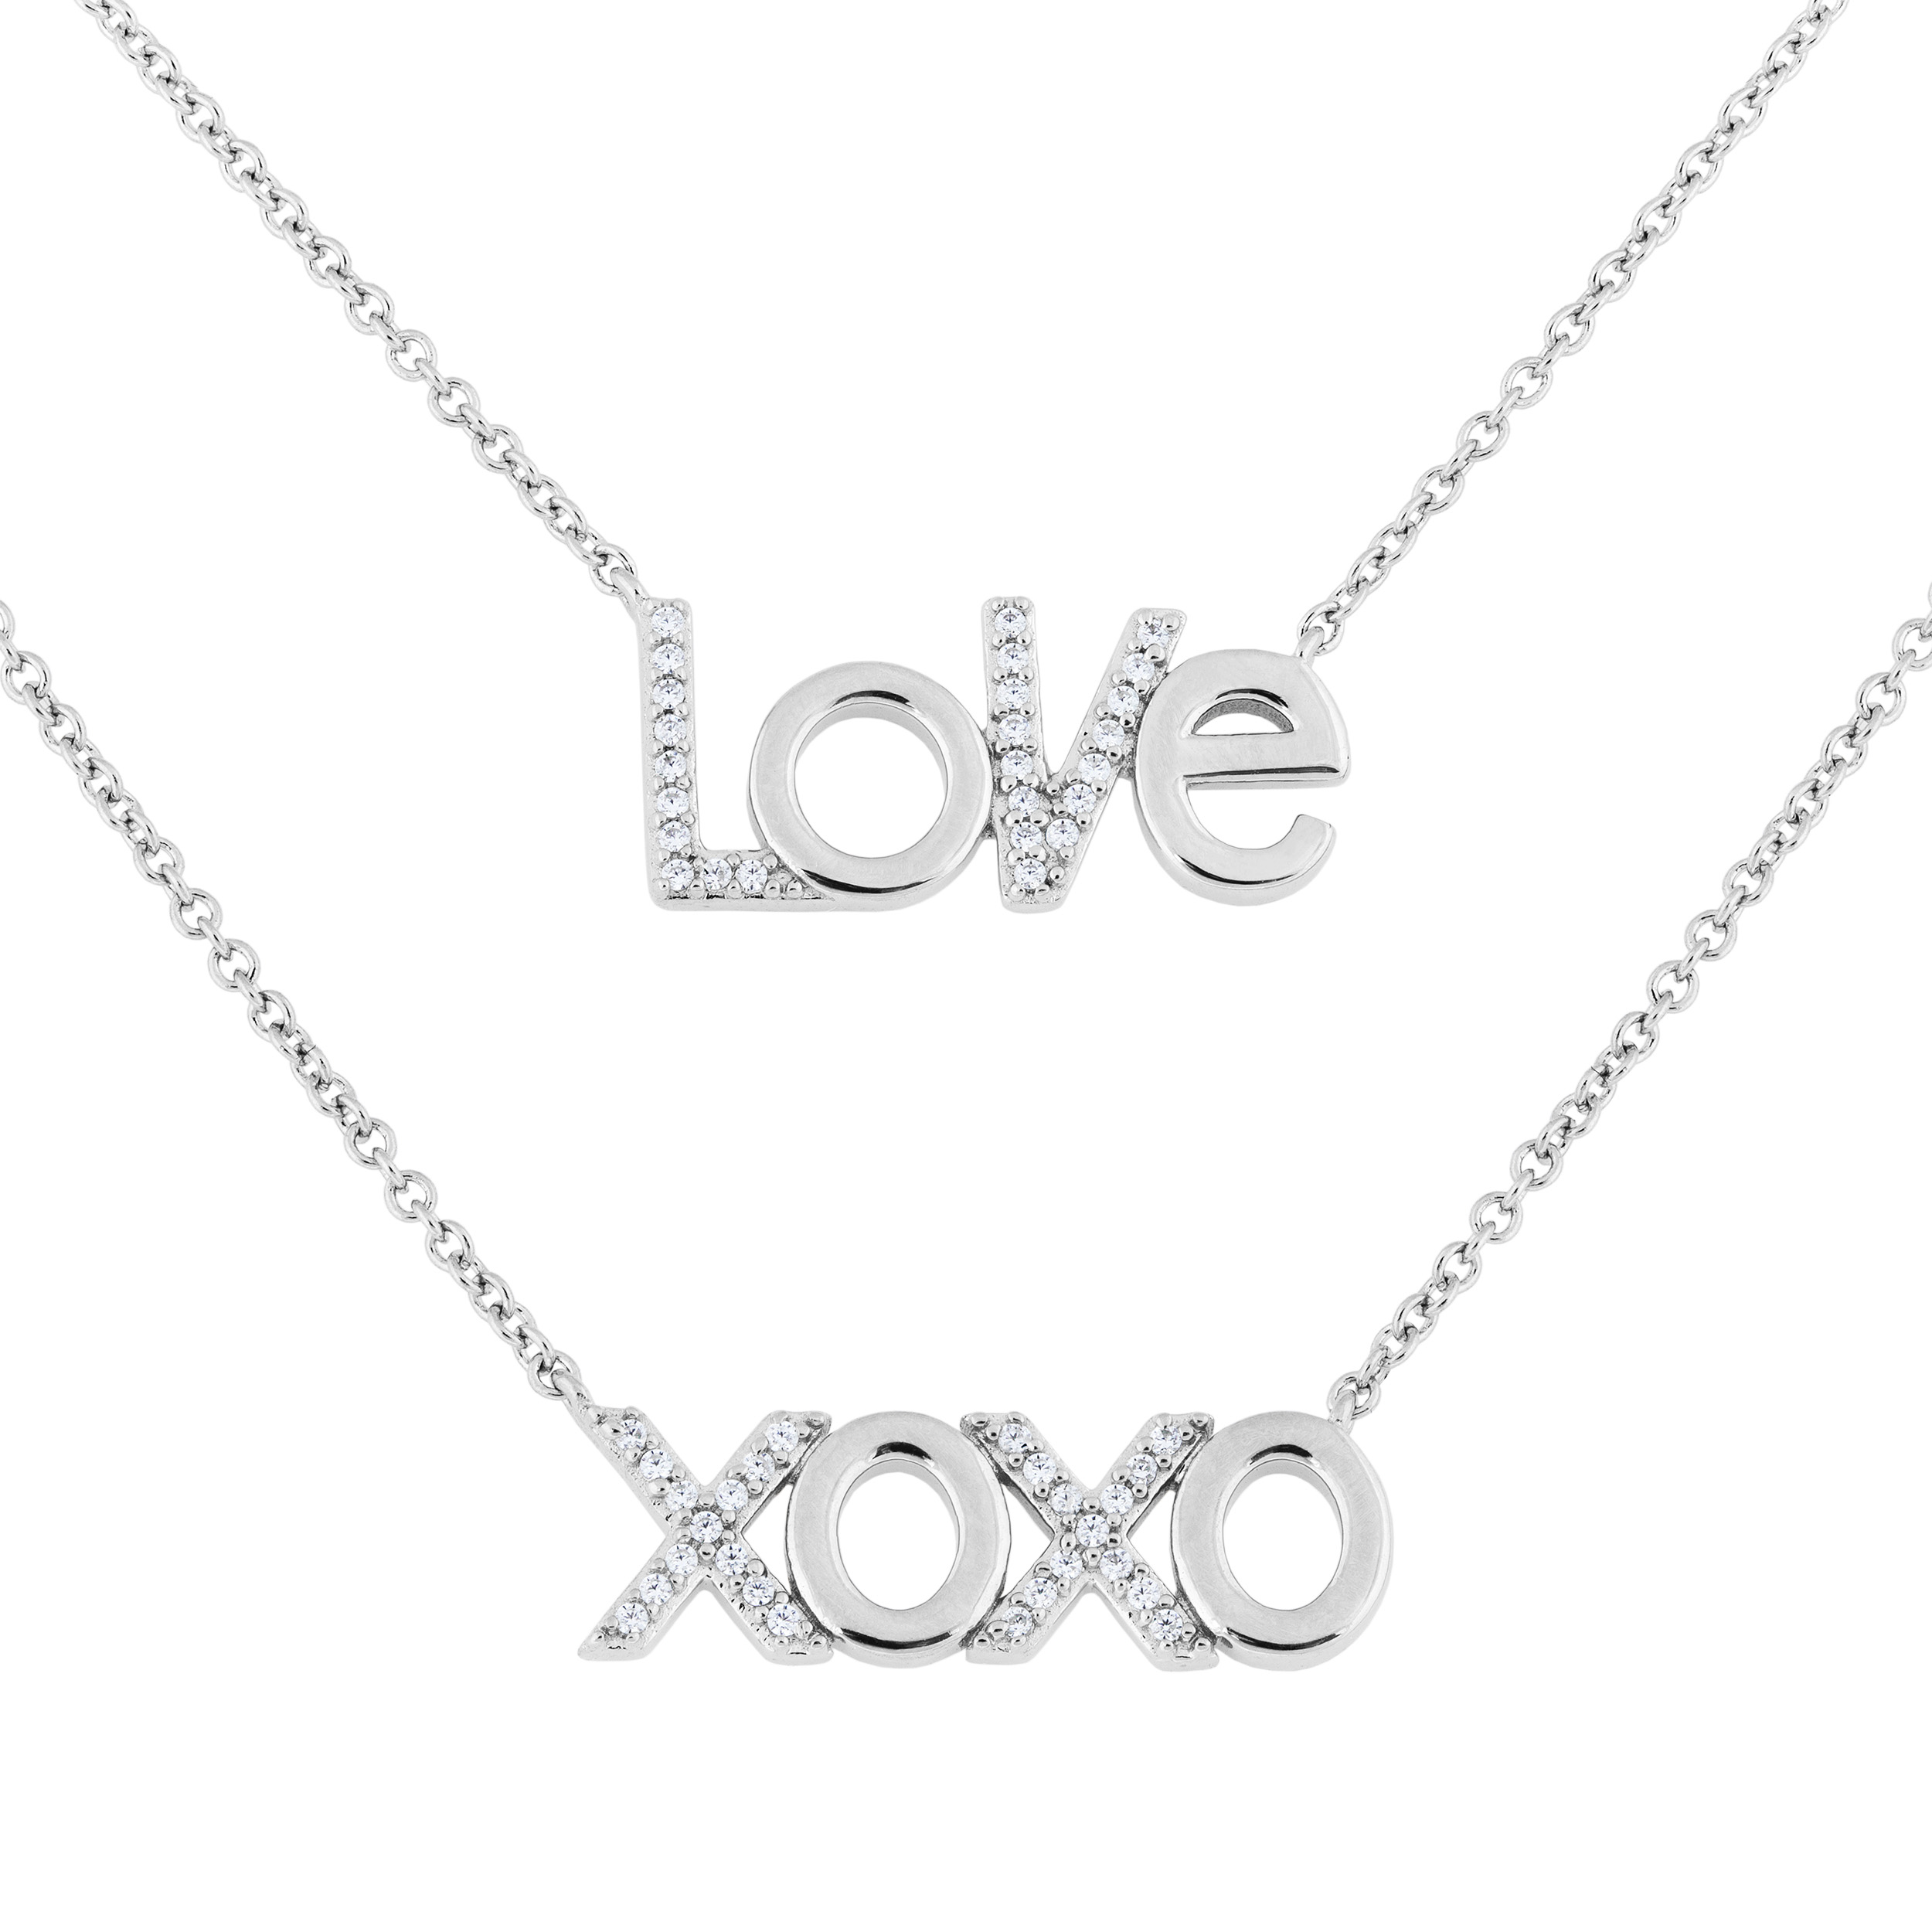 LOVE' and 'XOXO' Cubic Zirconia Layered Necklace, Rhodium Plated Sterling Silver, 18